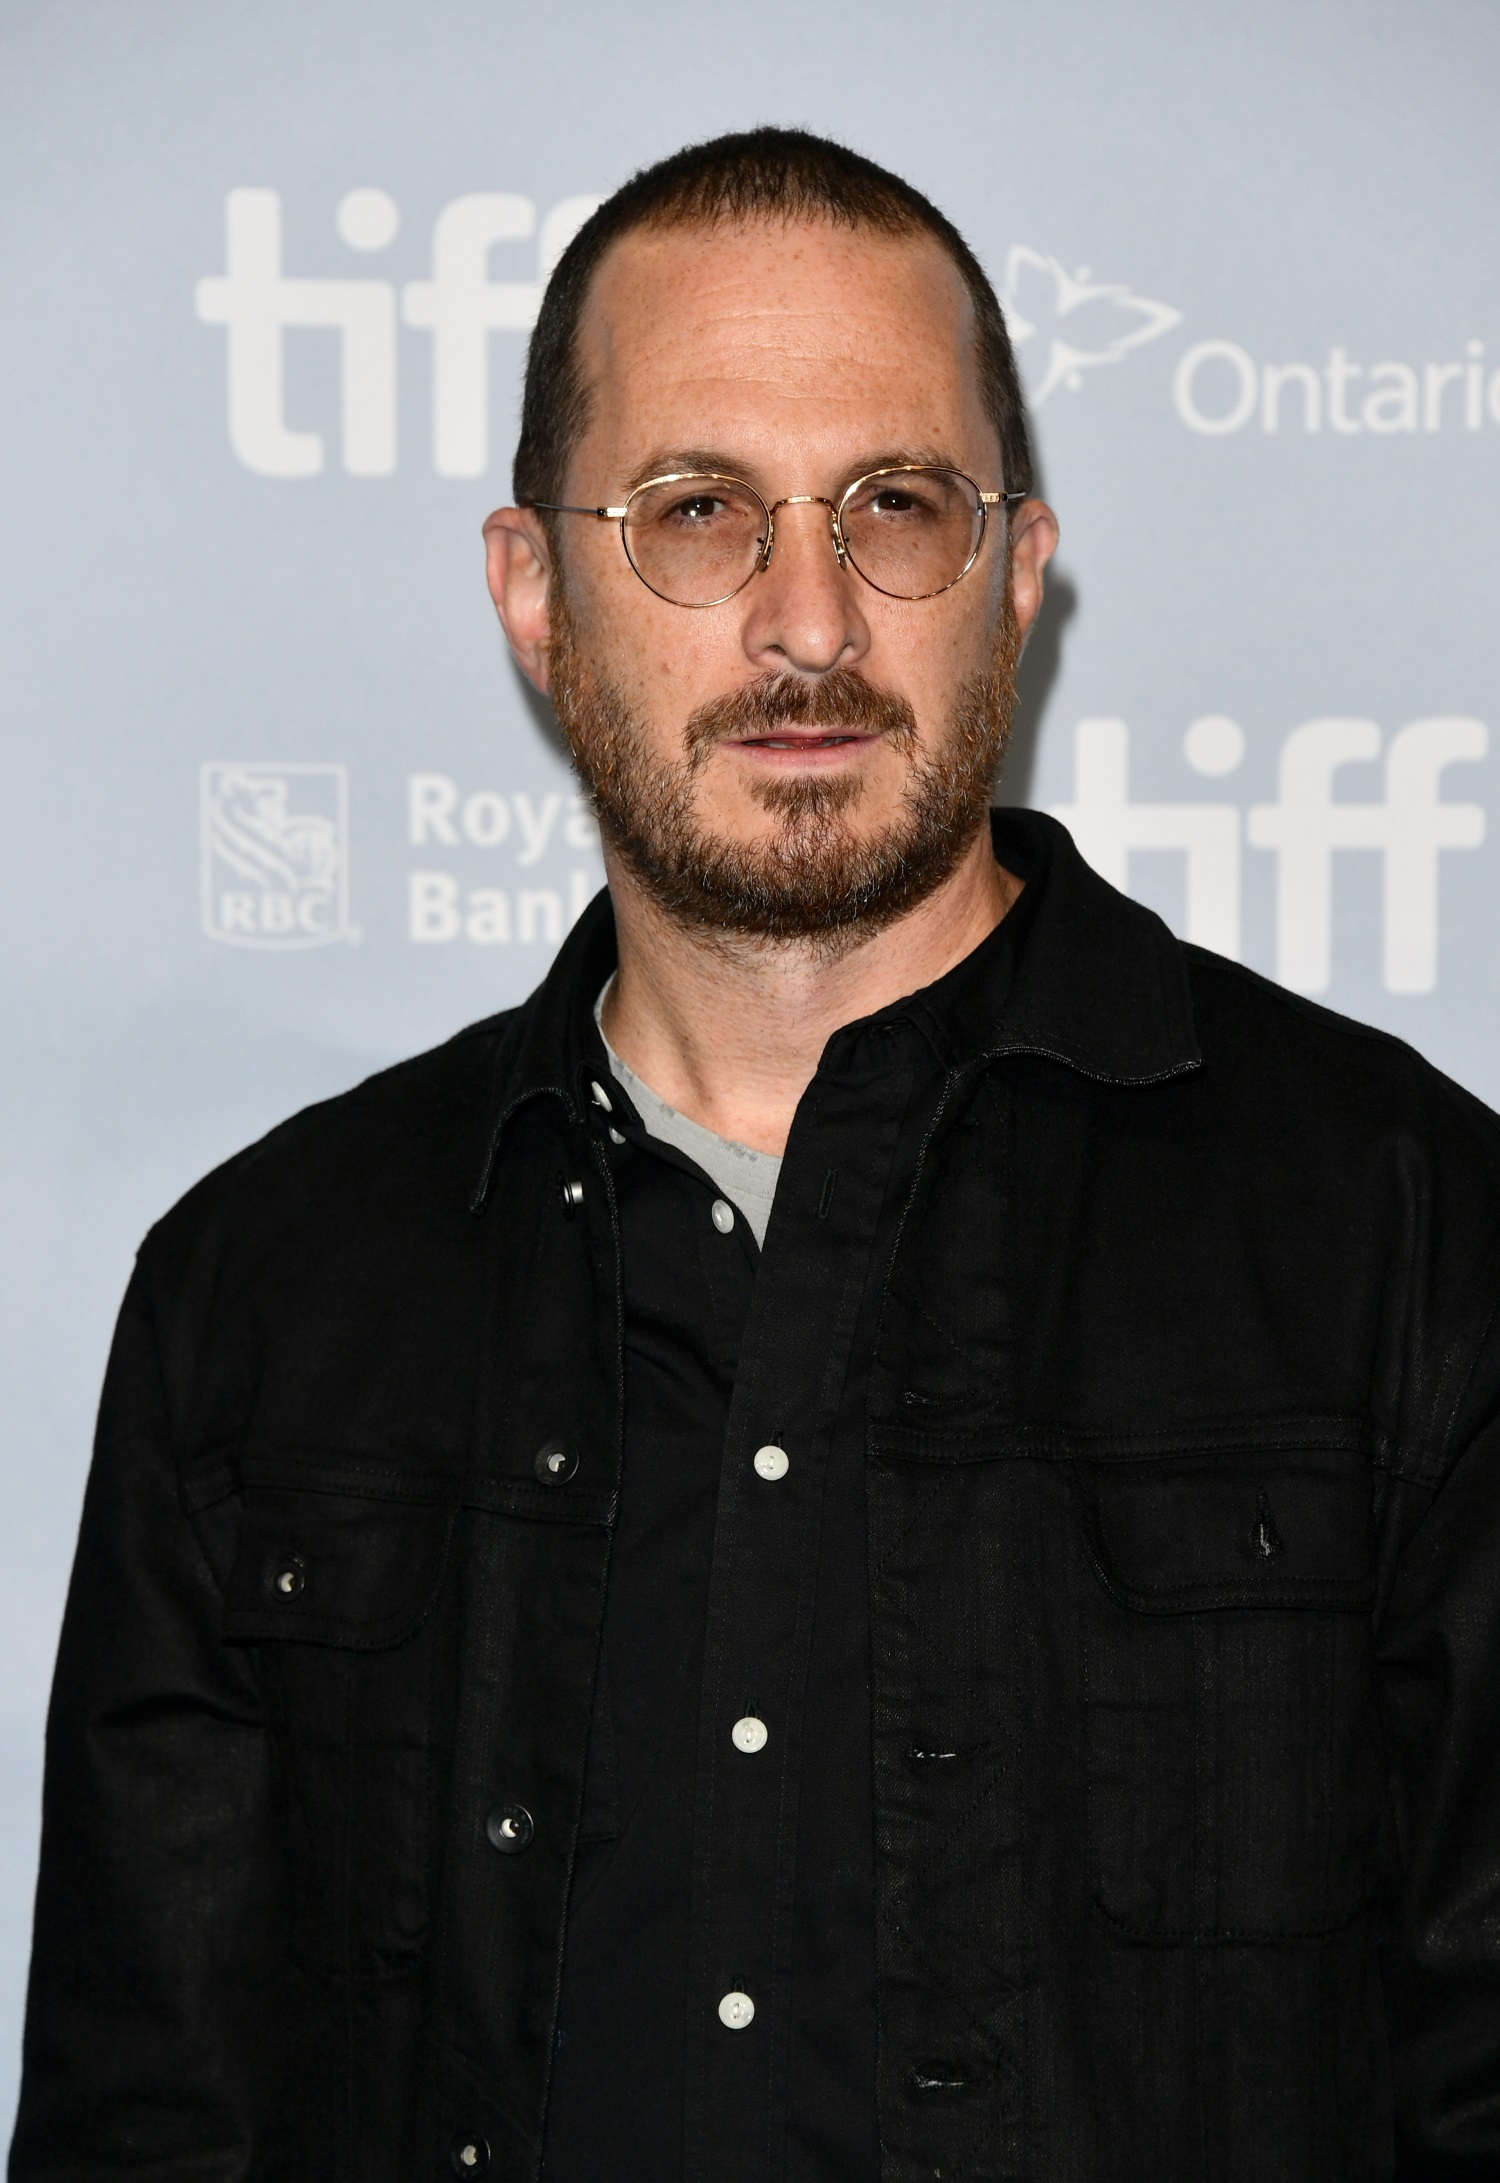 Darren Aronofsky posing for photos before the press conference